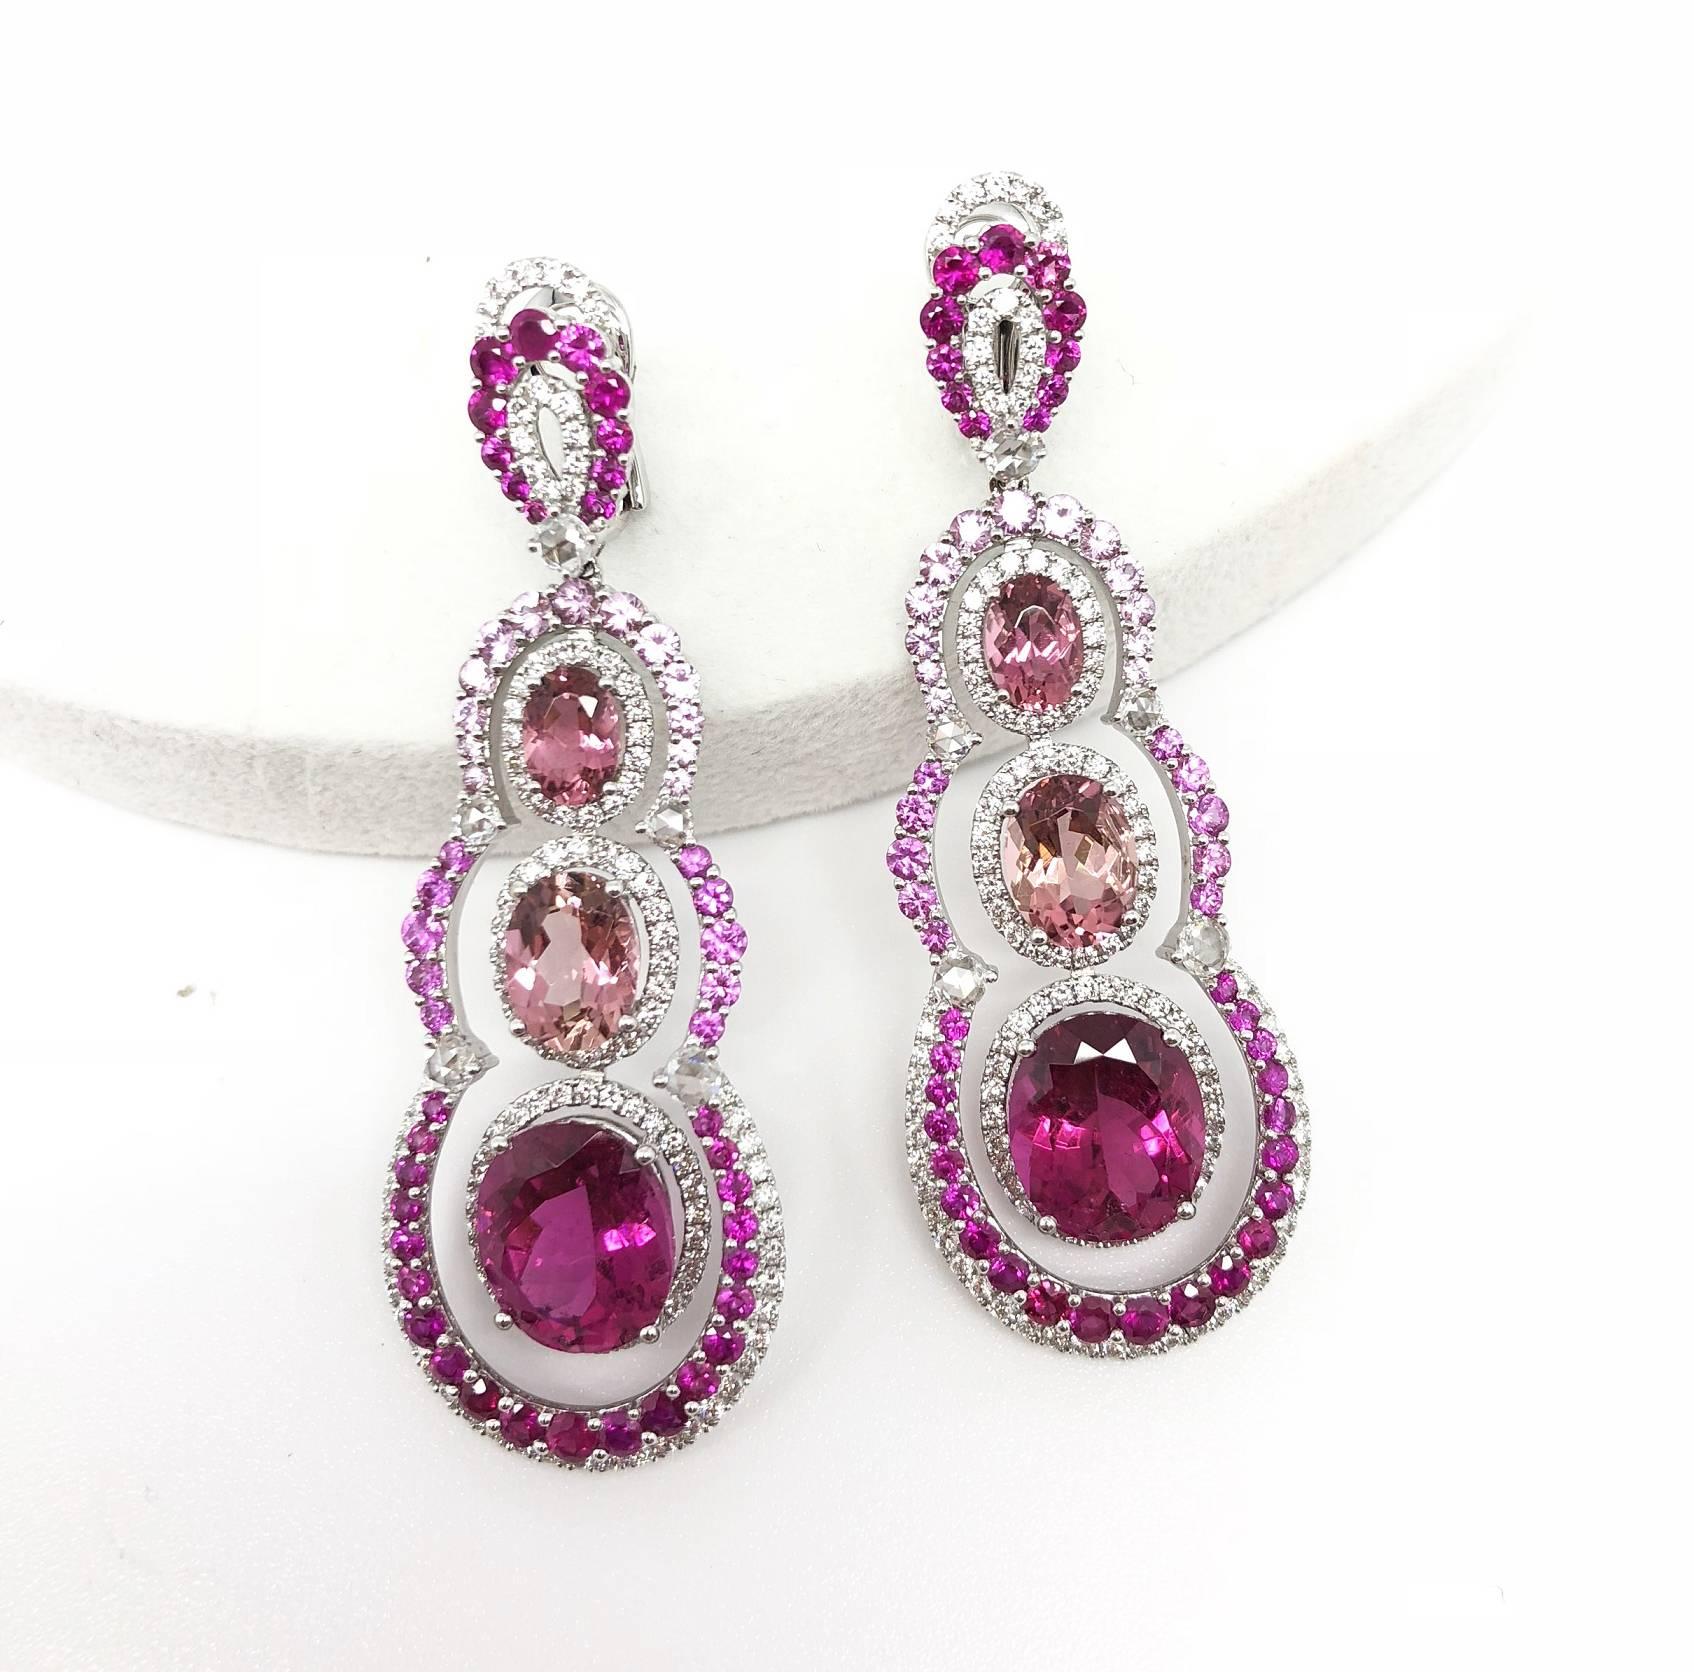 The Pinkish glamour will surely make you the most sparkling lady in the party. This stunning pair are made in 18 karat white gold with natural Rubelite, Tourmaline, Pink Sapphire and Diamonds.